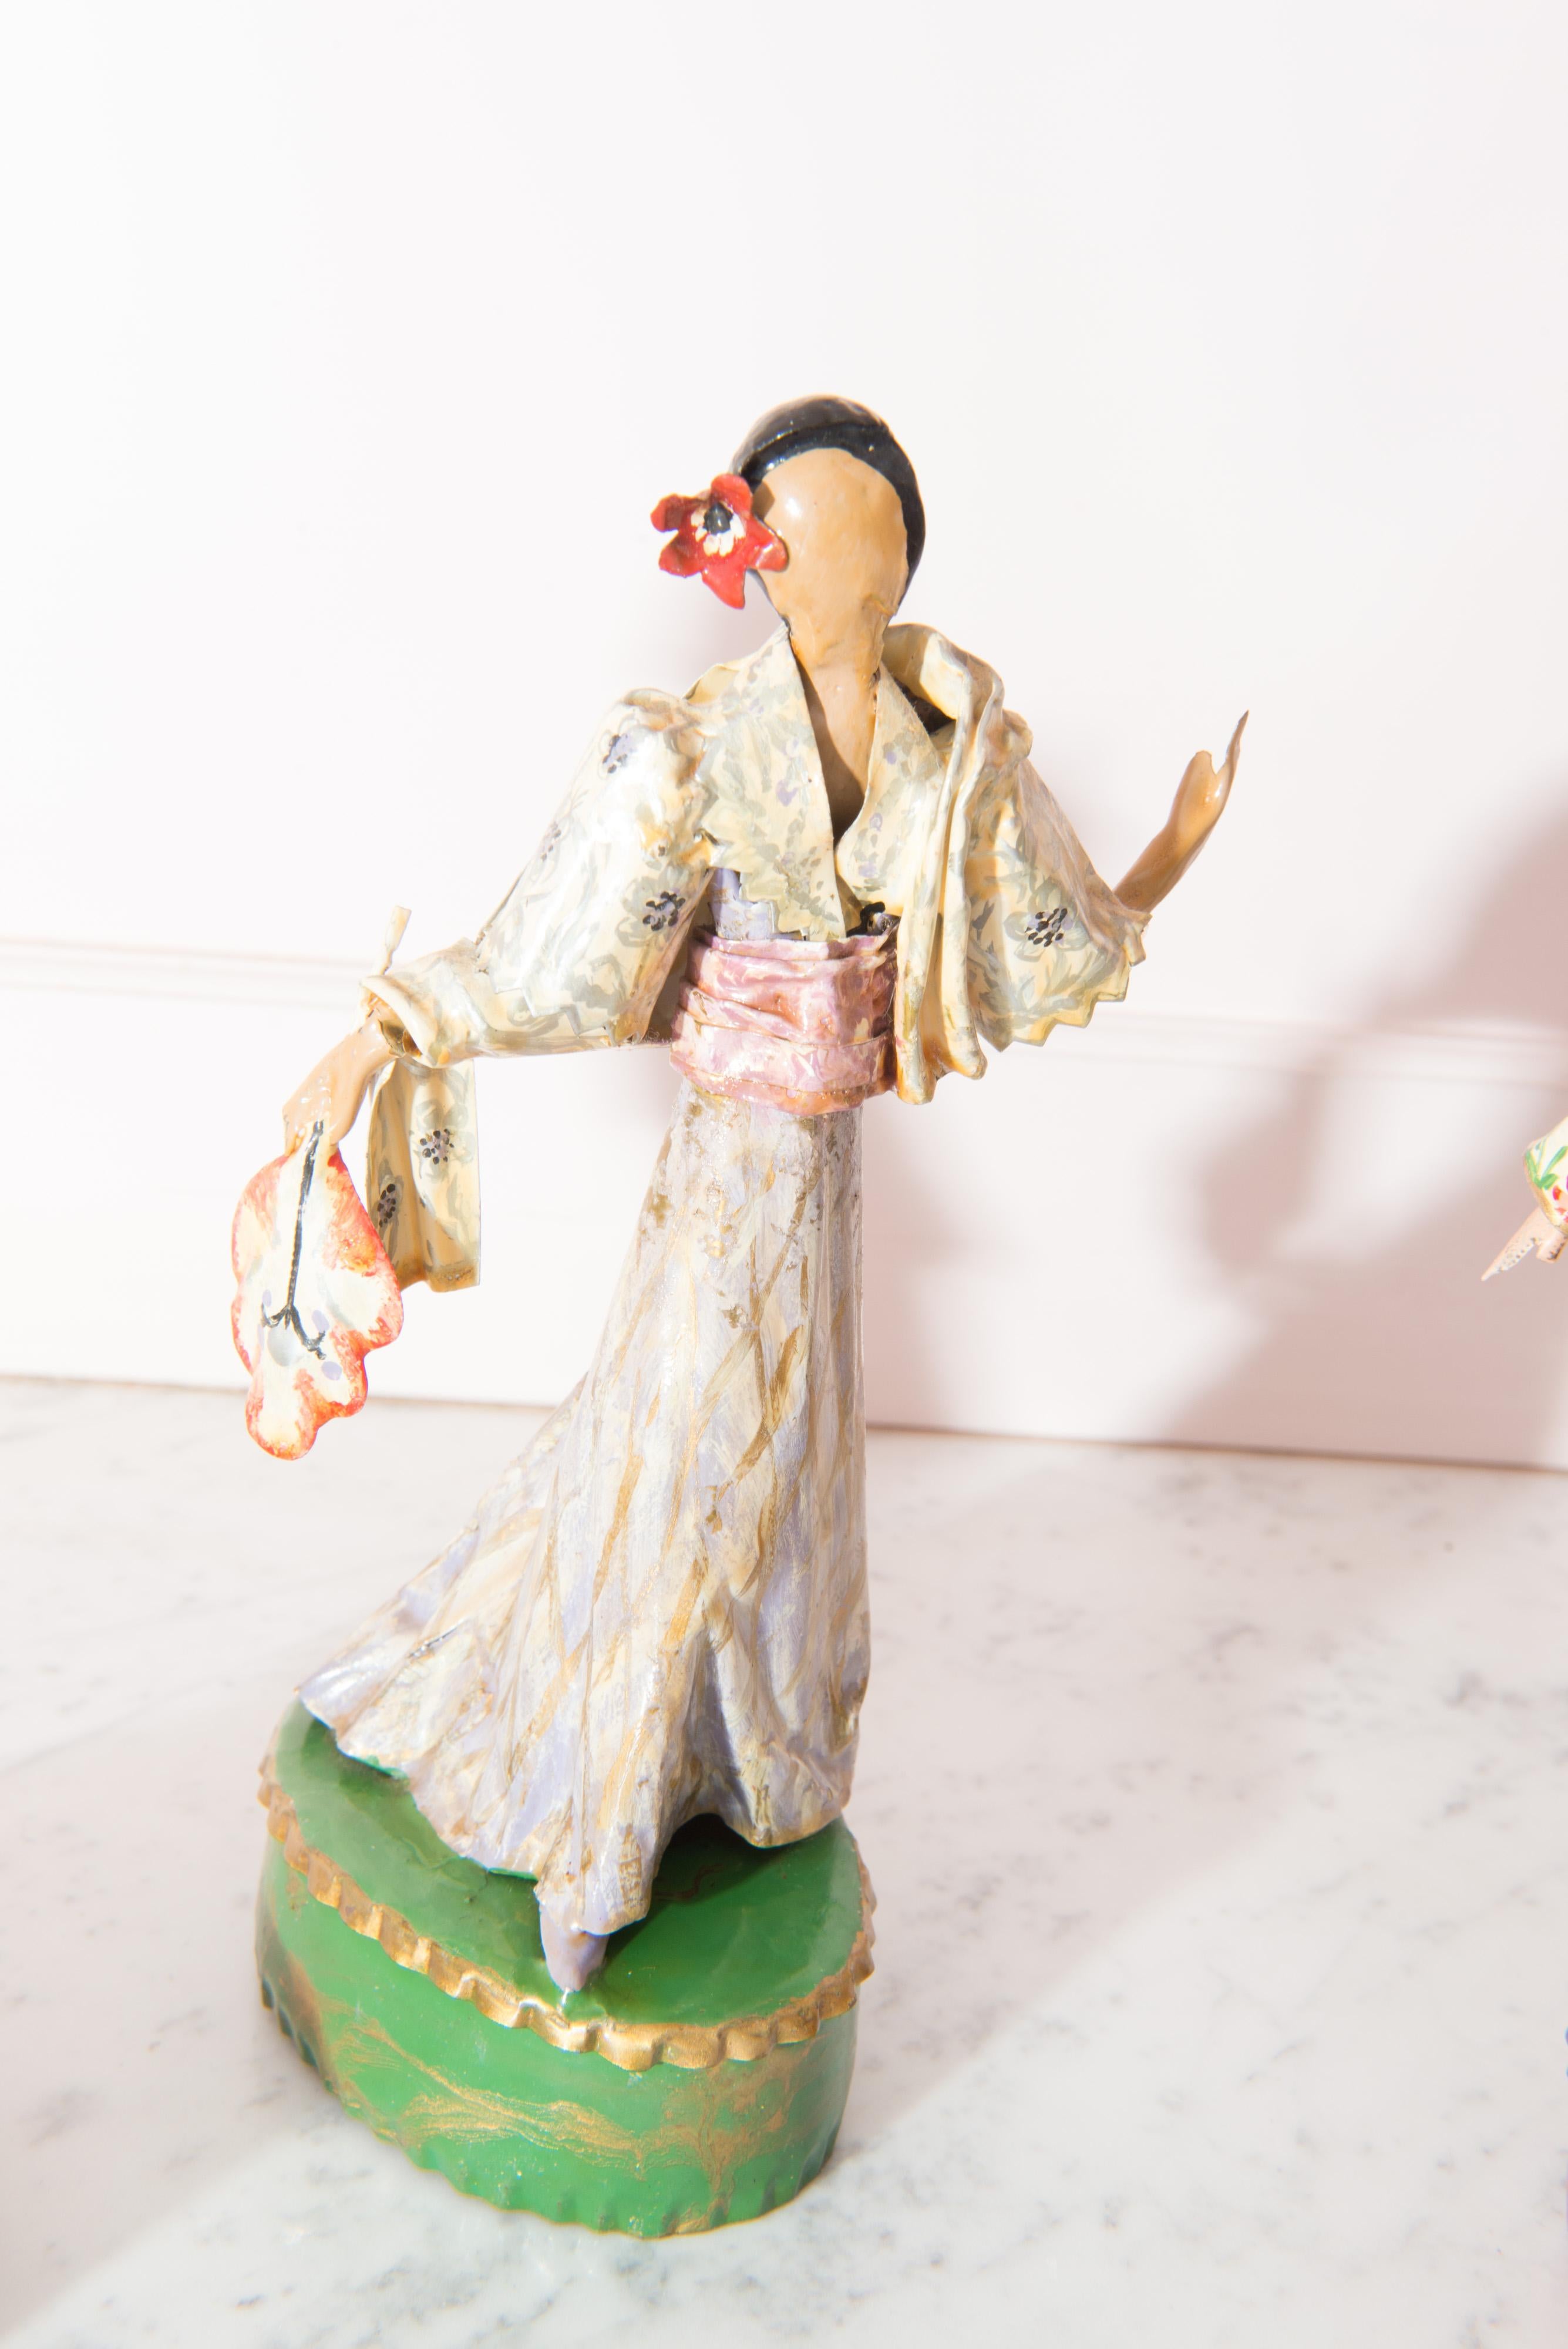 Hand-Painted Trio of Asian Costumed Women Sculptures by Lee Menichetti For Sale